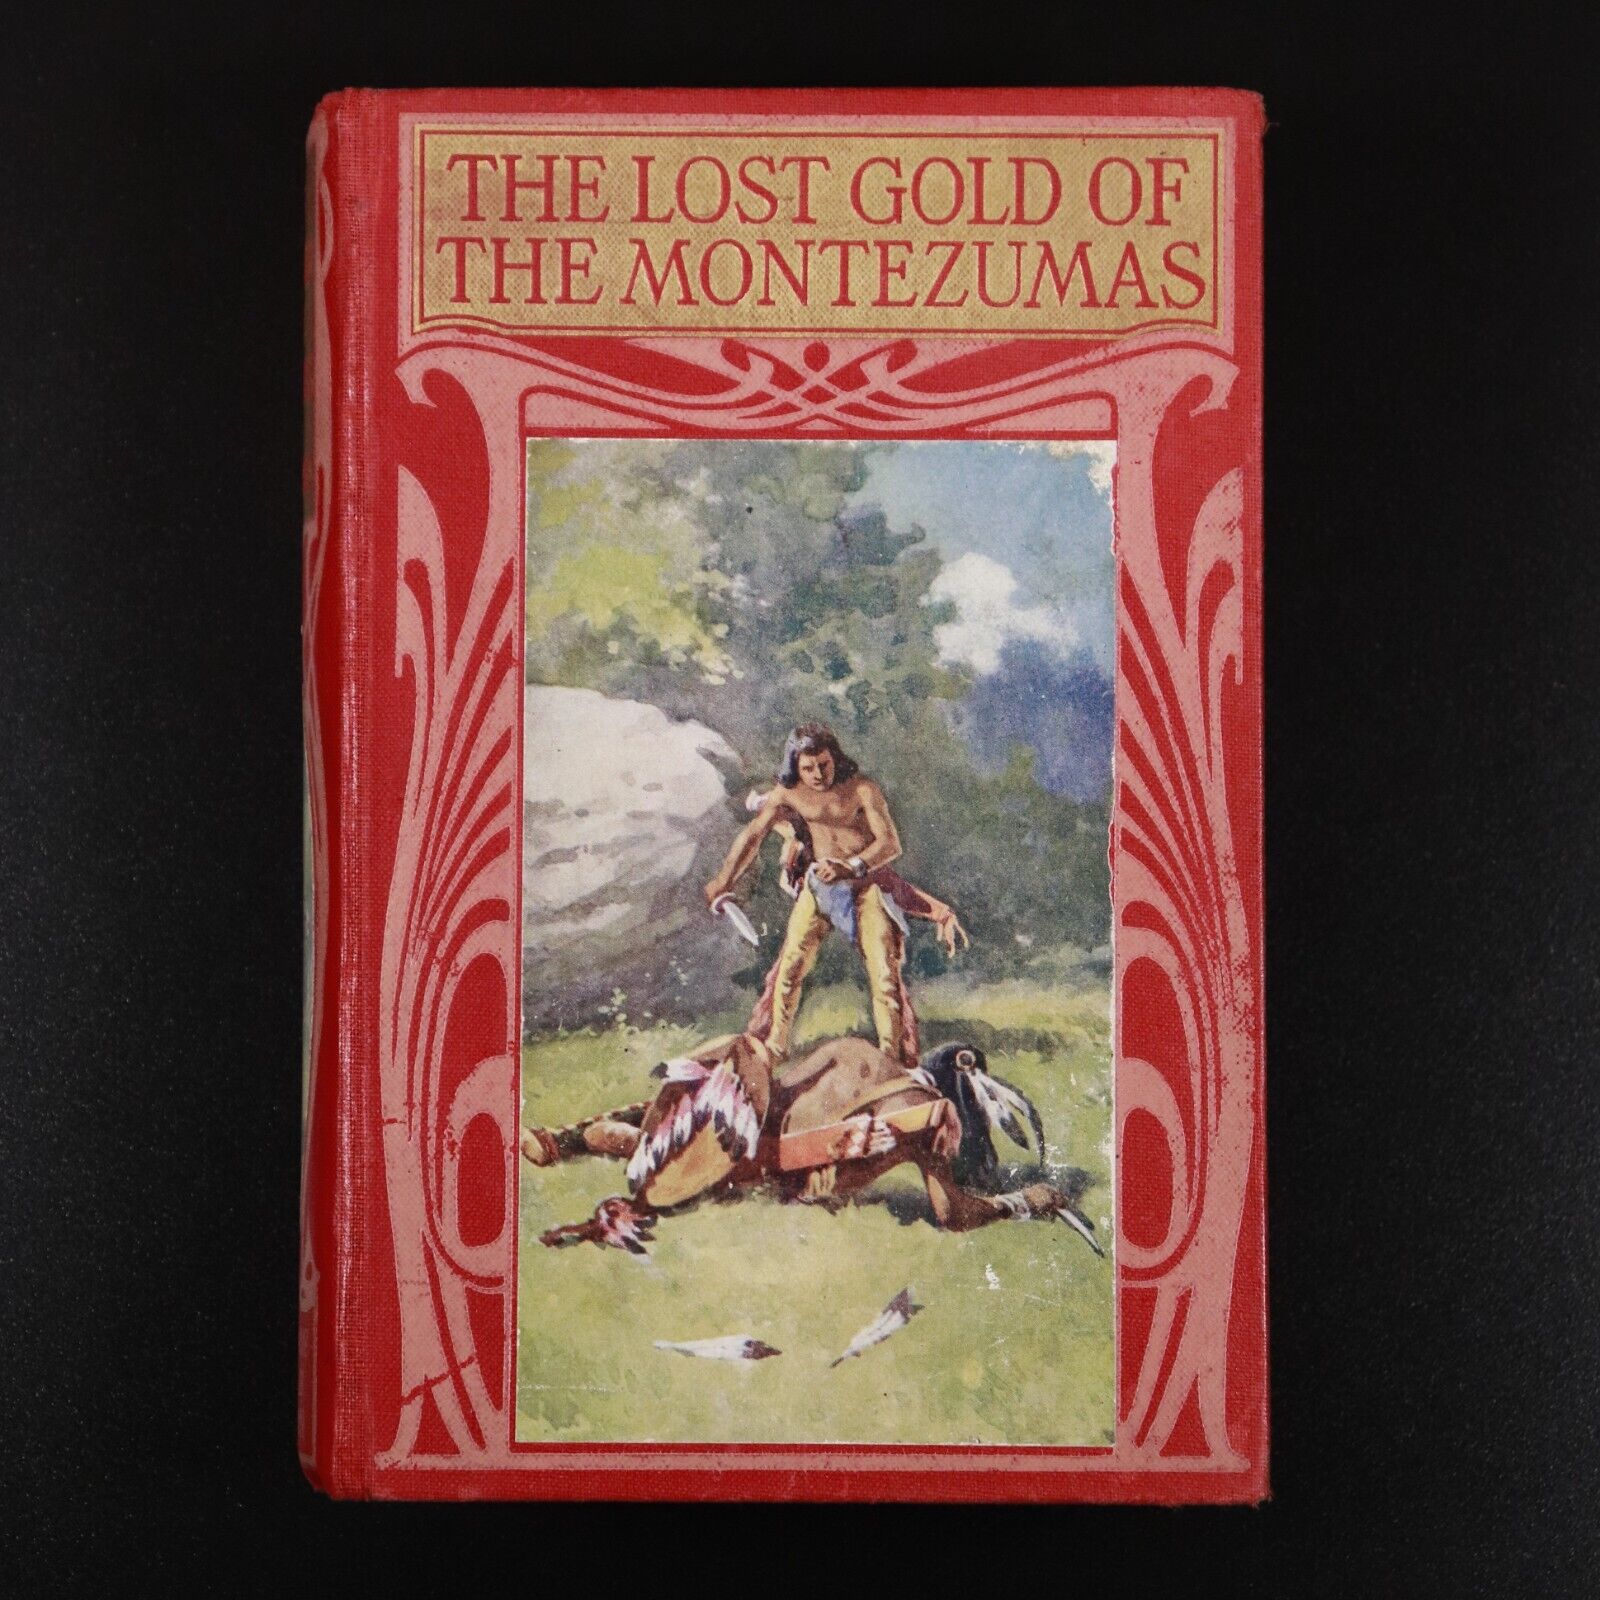 c1915 The Lost Gold Of The Montezumas Antique American Fiction Book Stoddard - 0